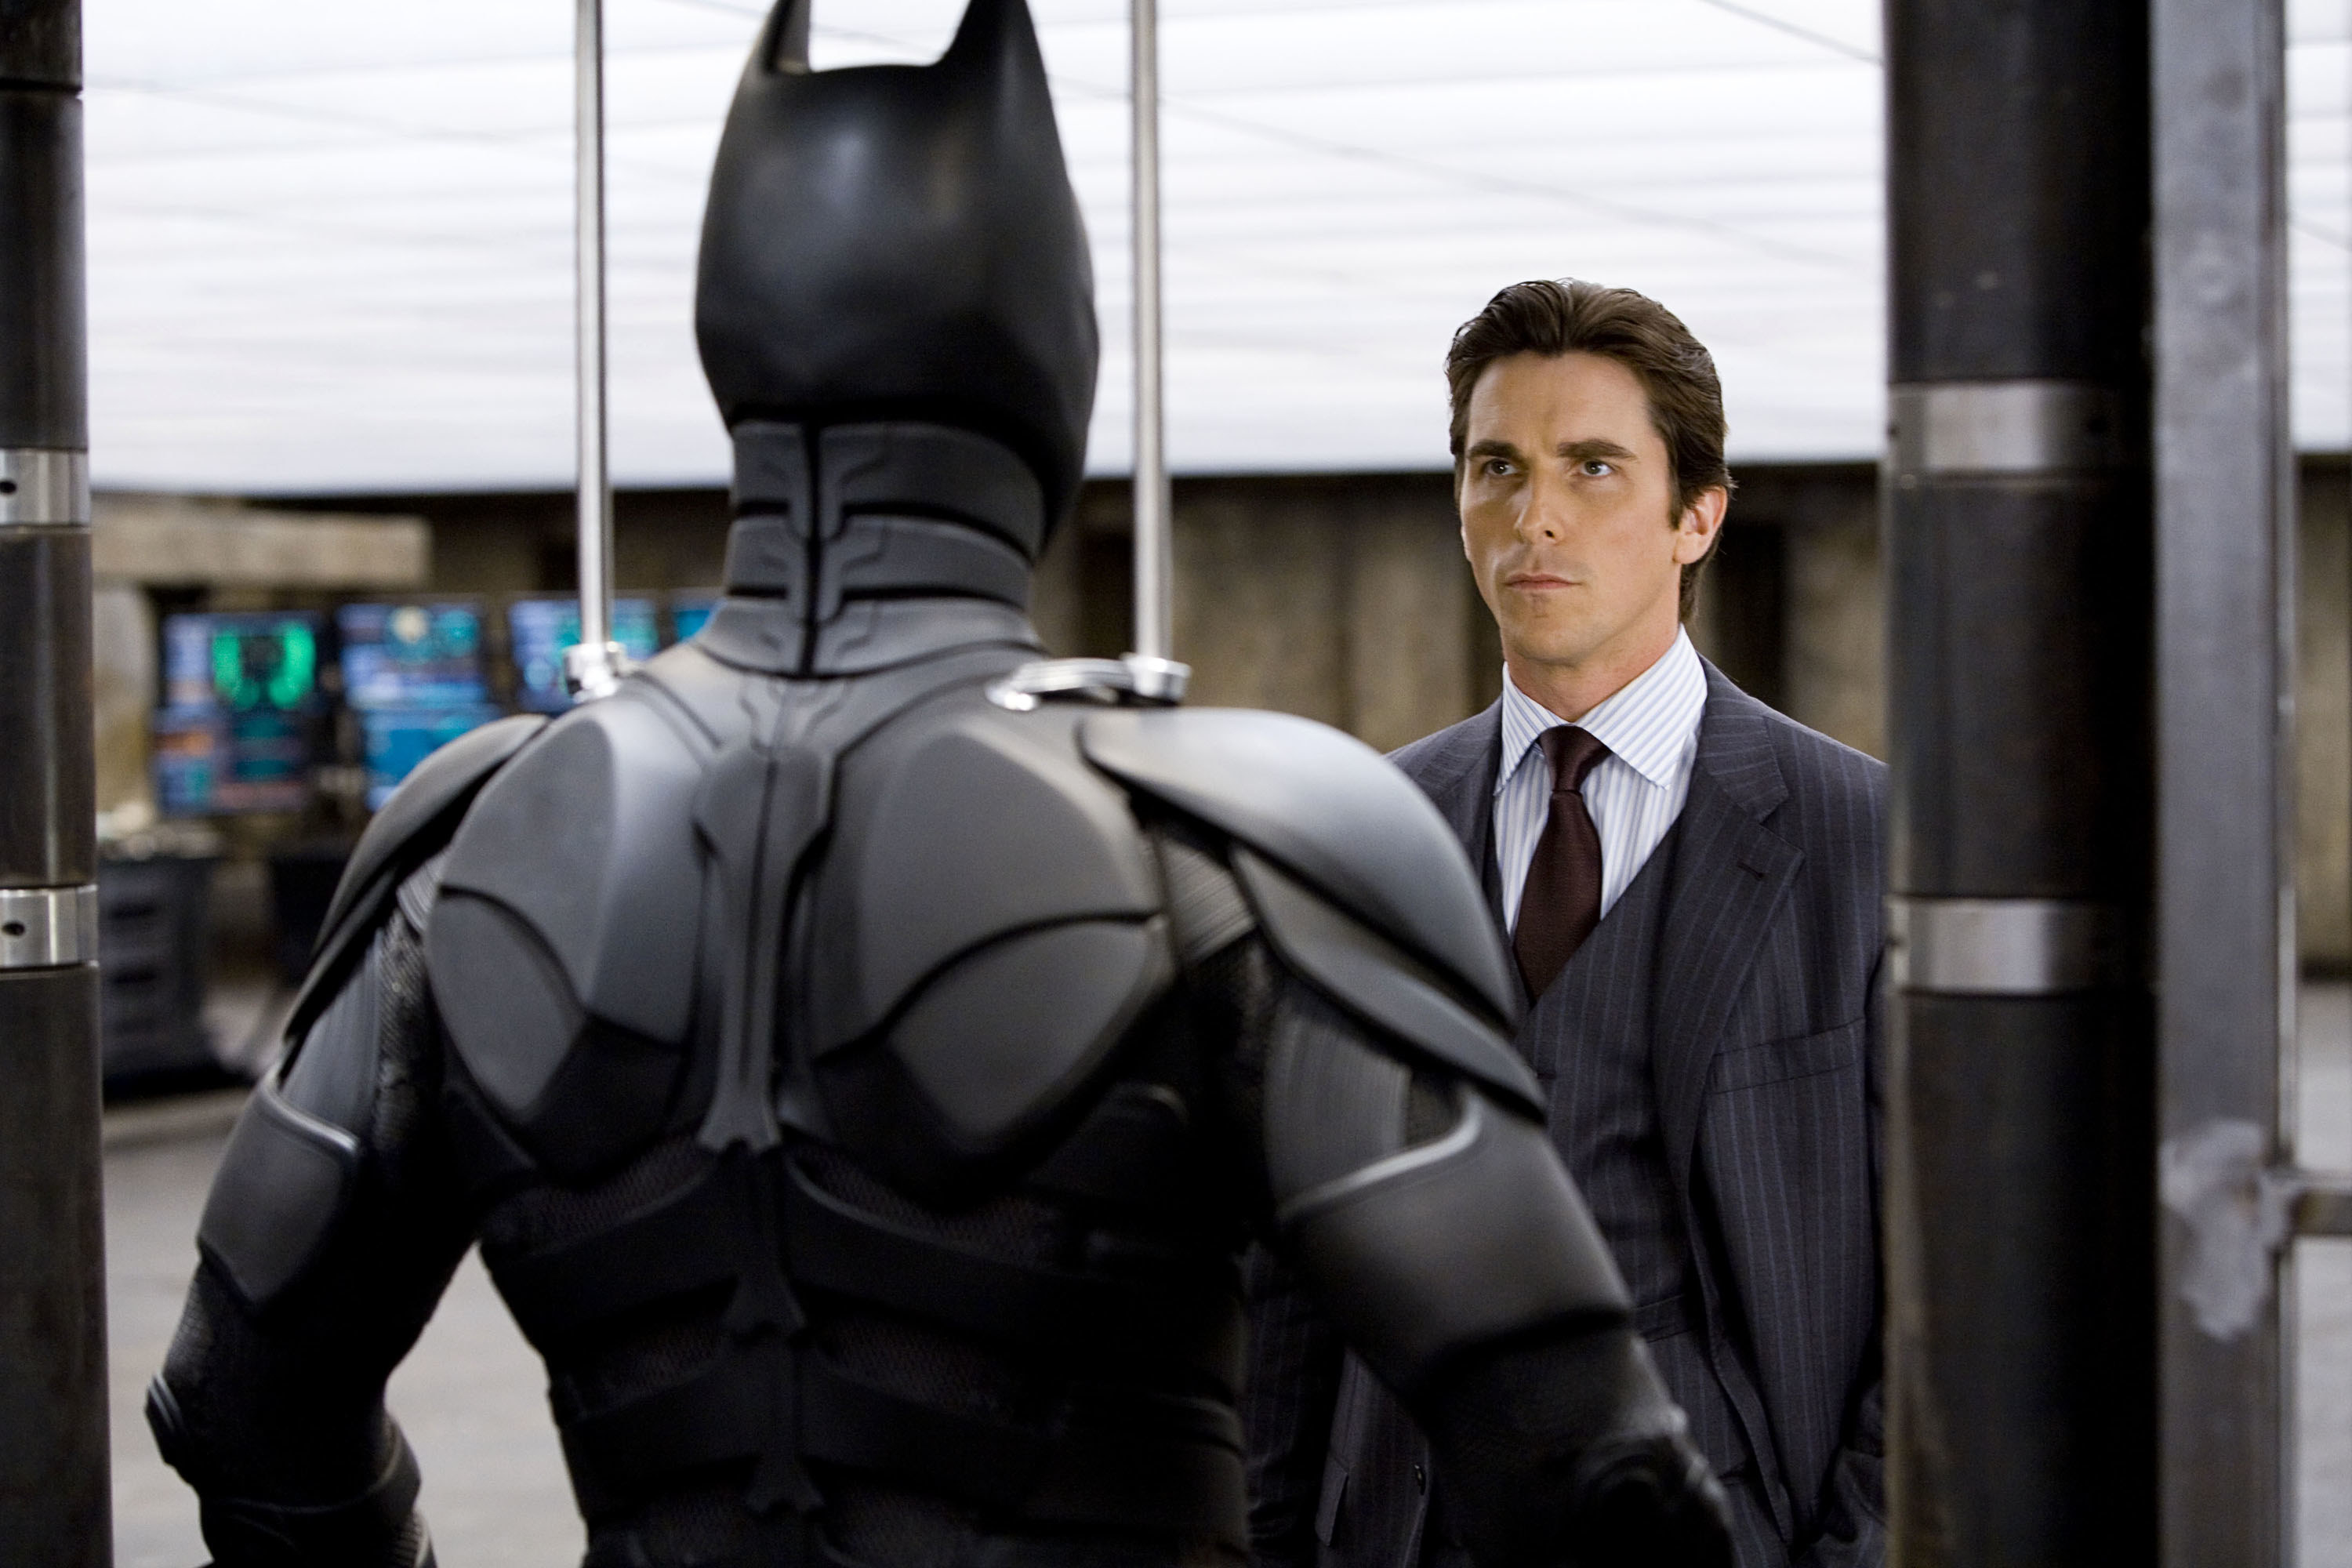 Christian Bale looking at Batman in the mirror